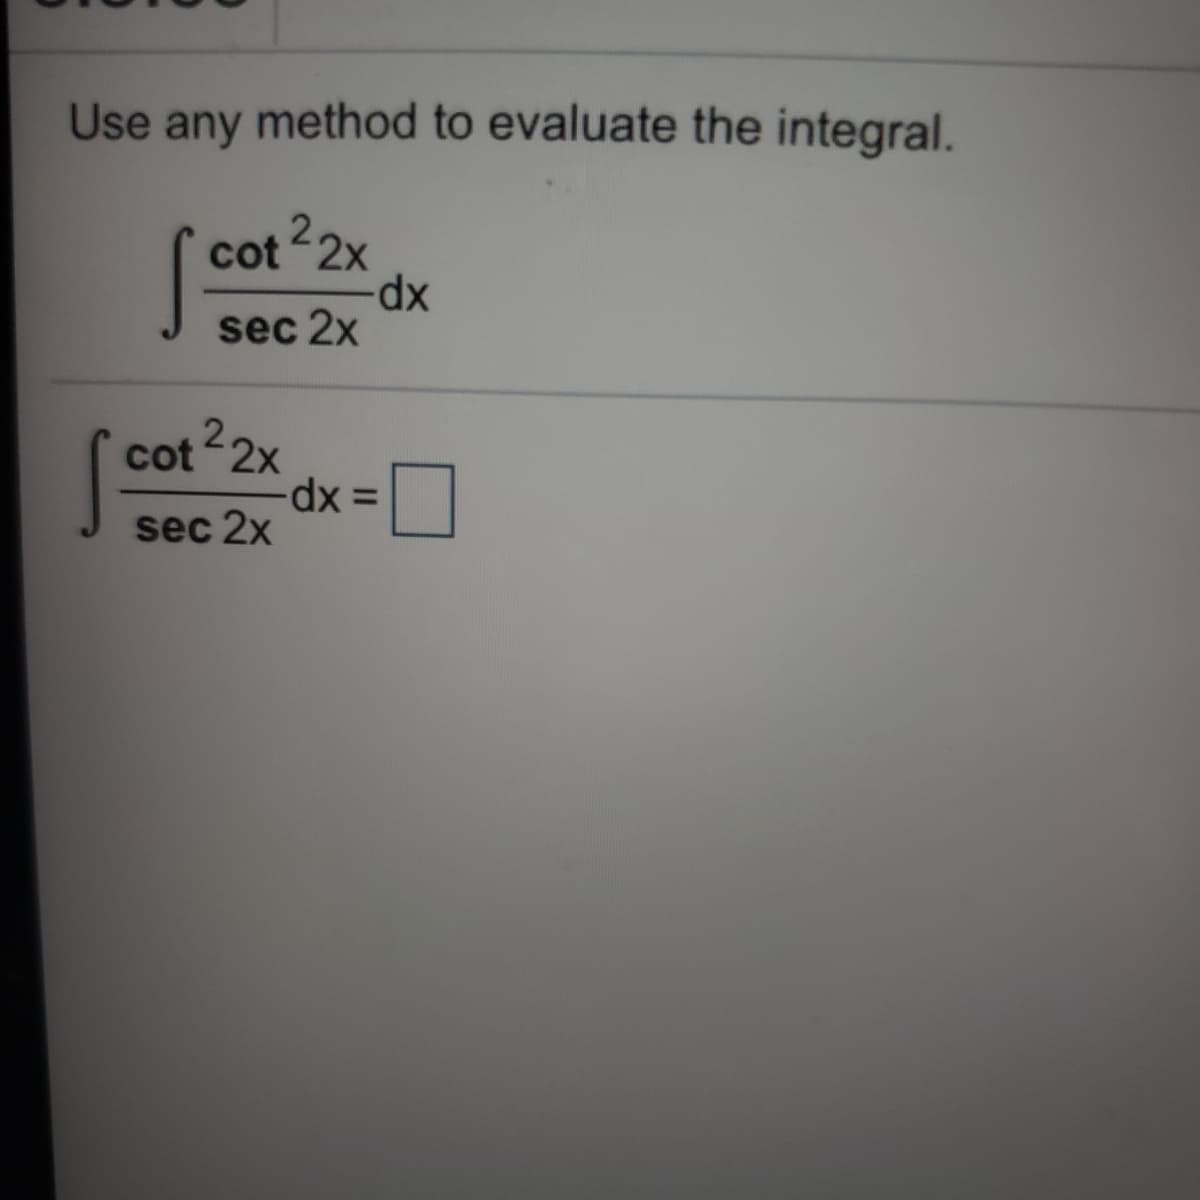 Use any method to evaluate the integral.
cot 2x
xp-
sec 2x
cot 2x
sec 2x
